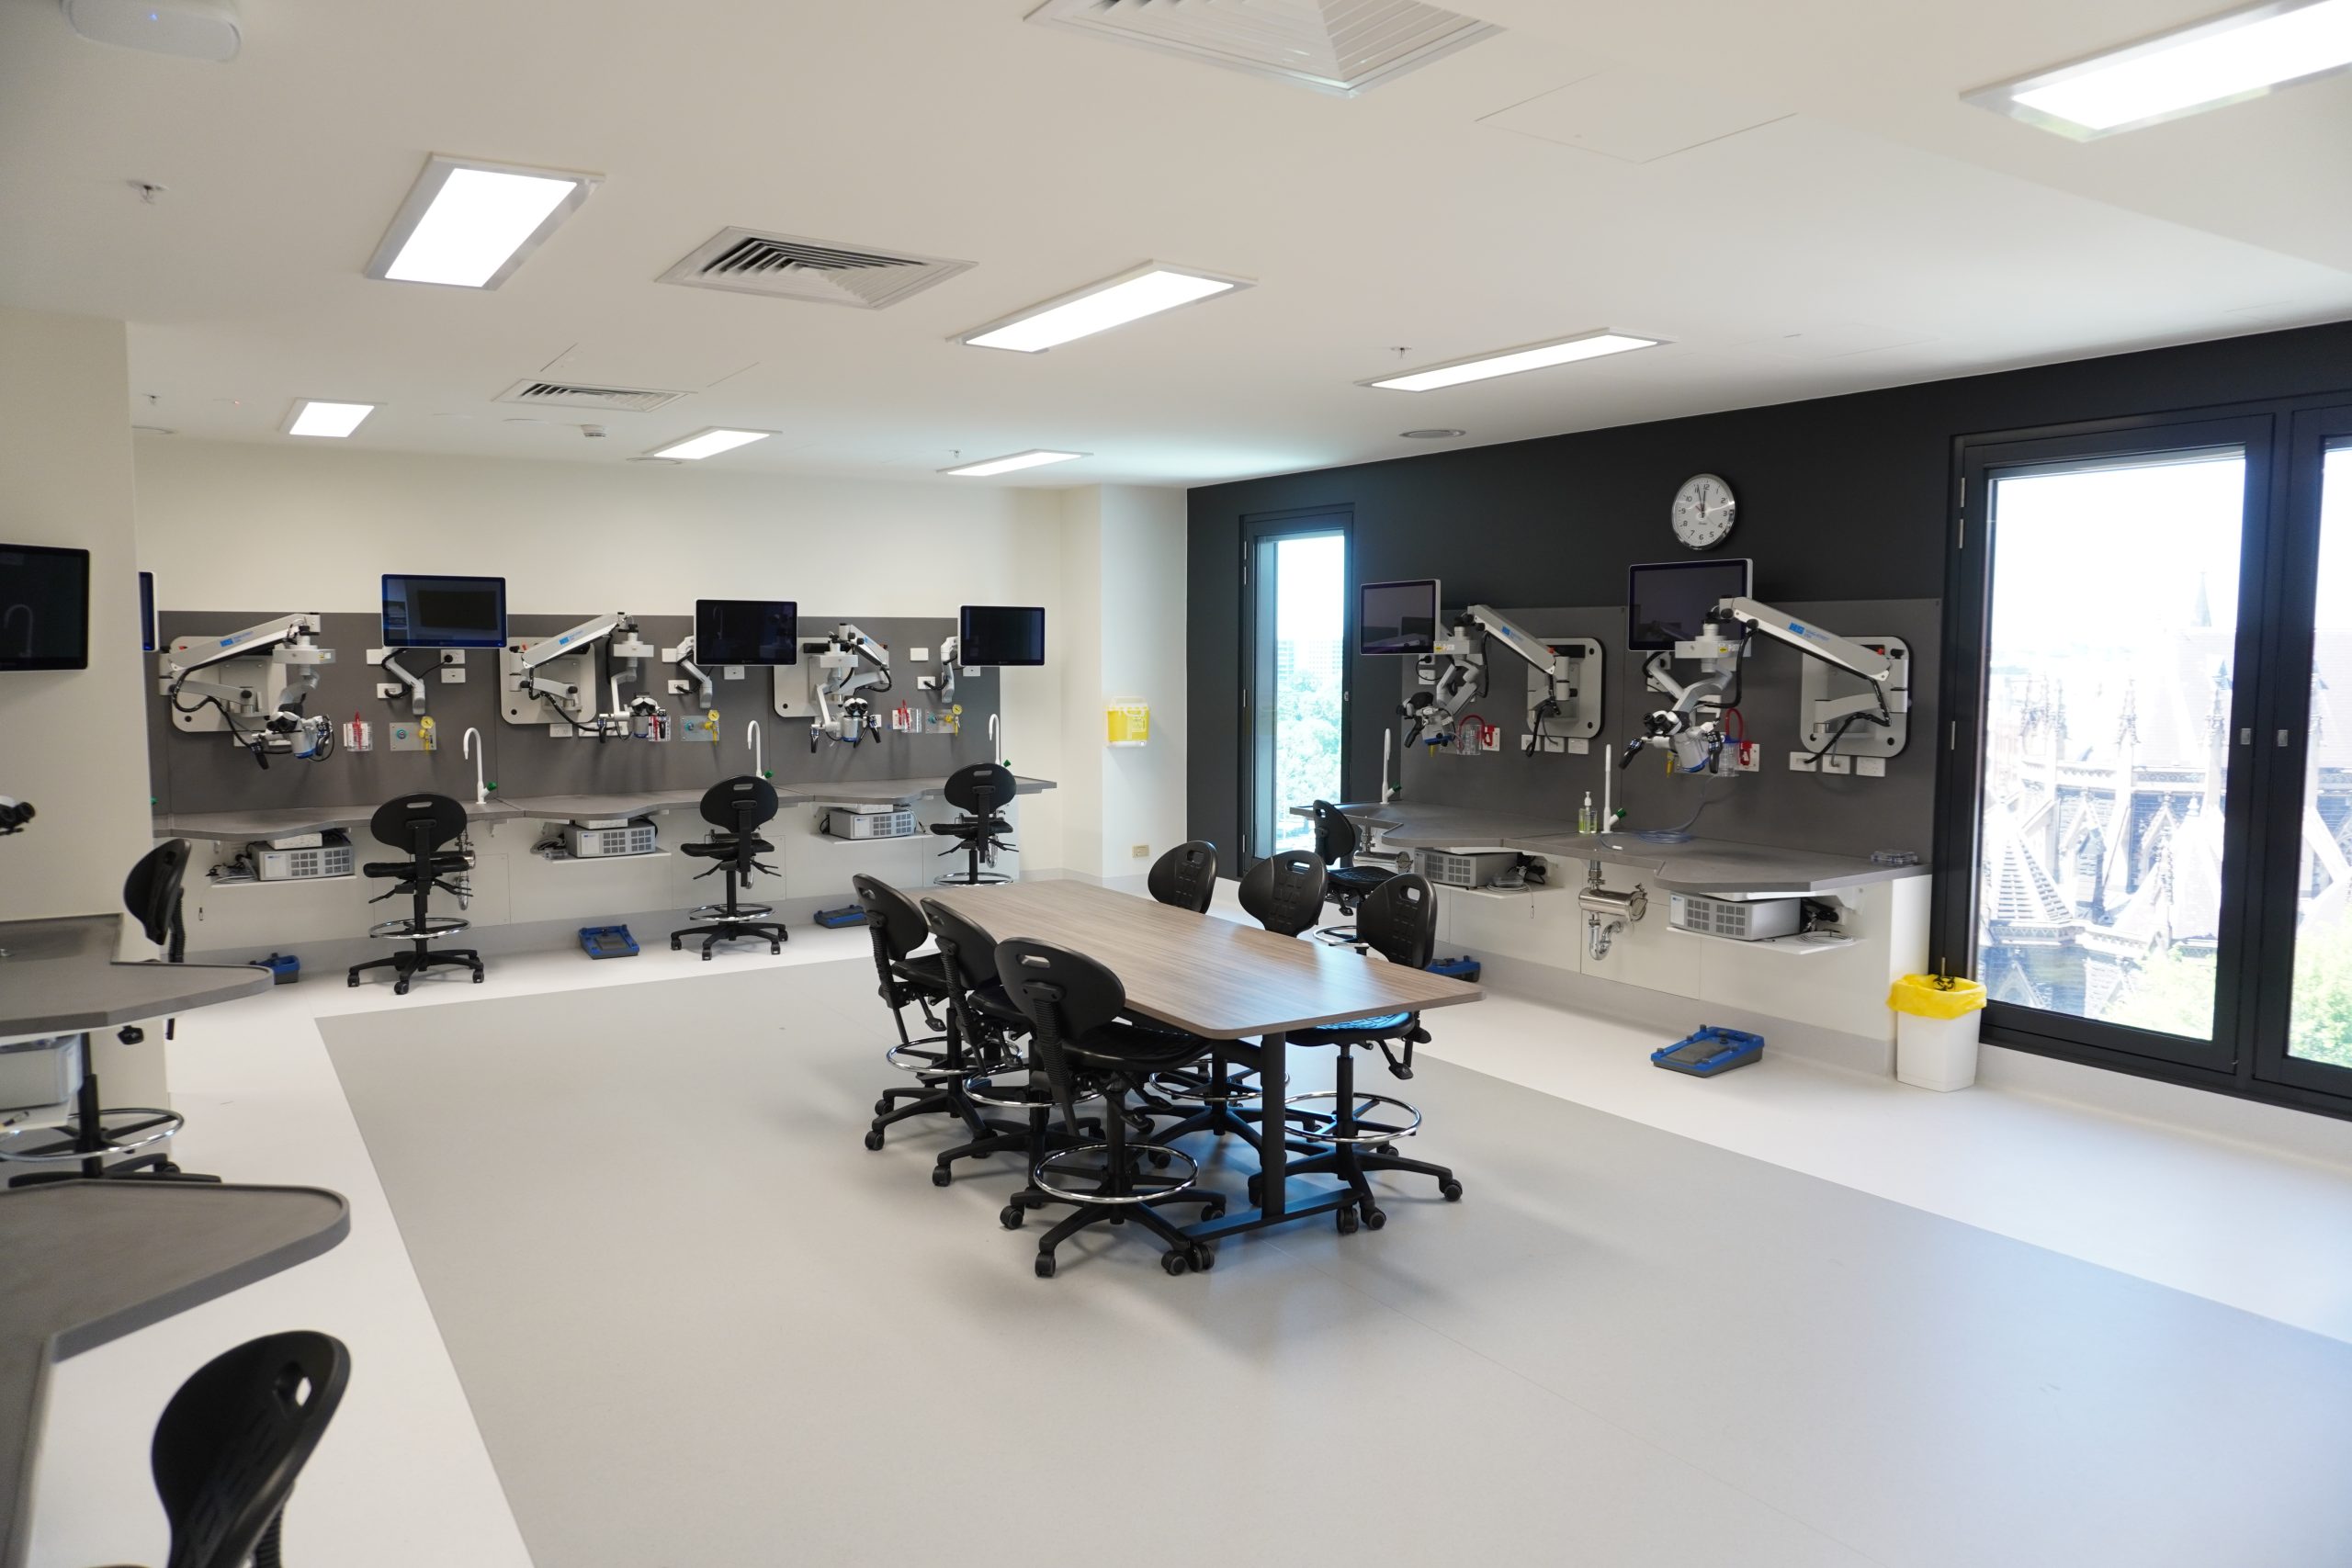 Surgical Skills Lab featuring a long meeting table and 9 workstations